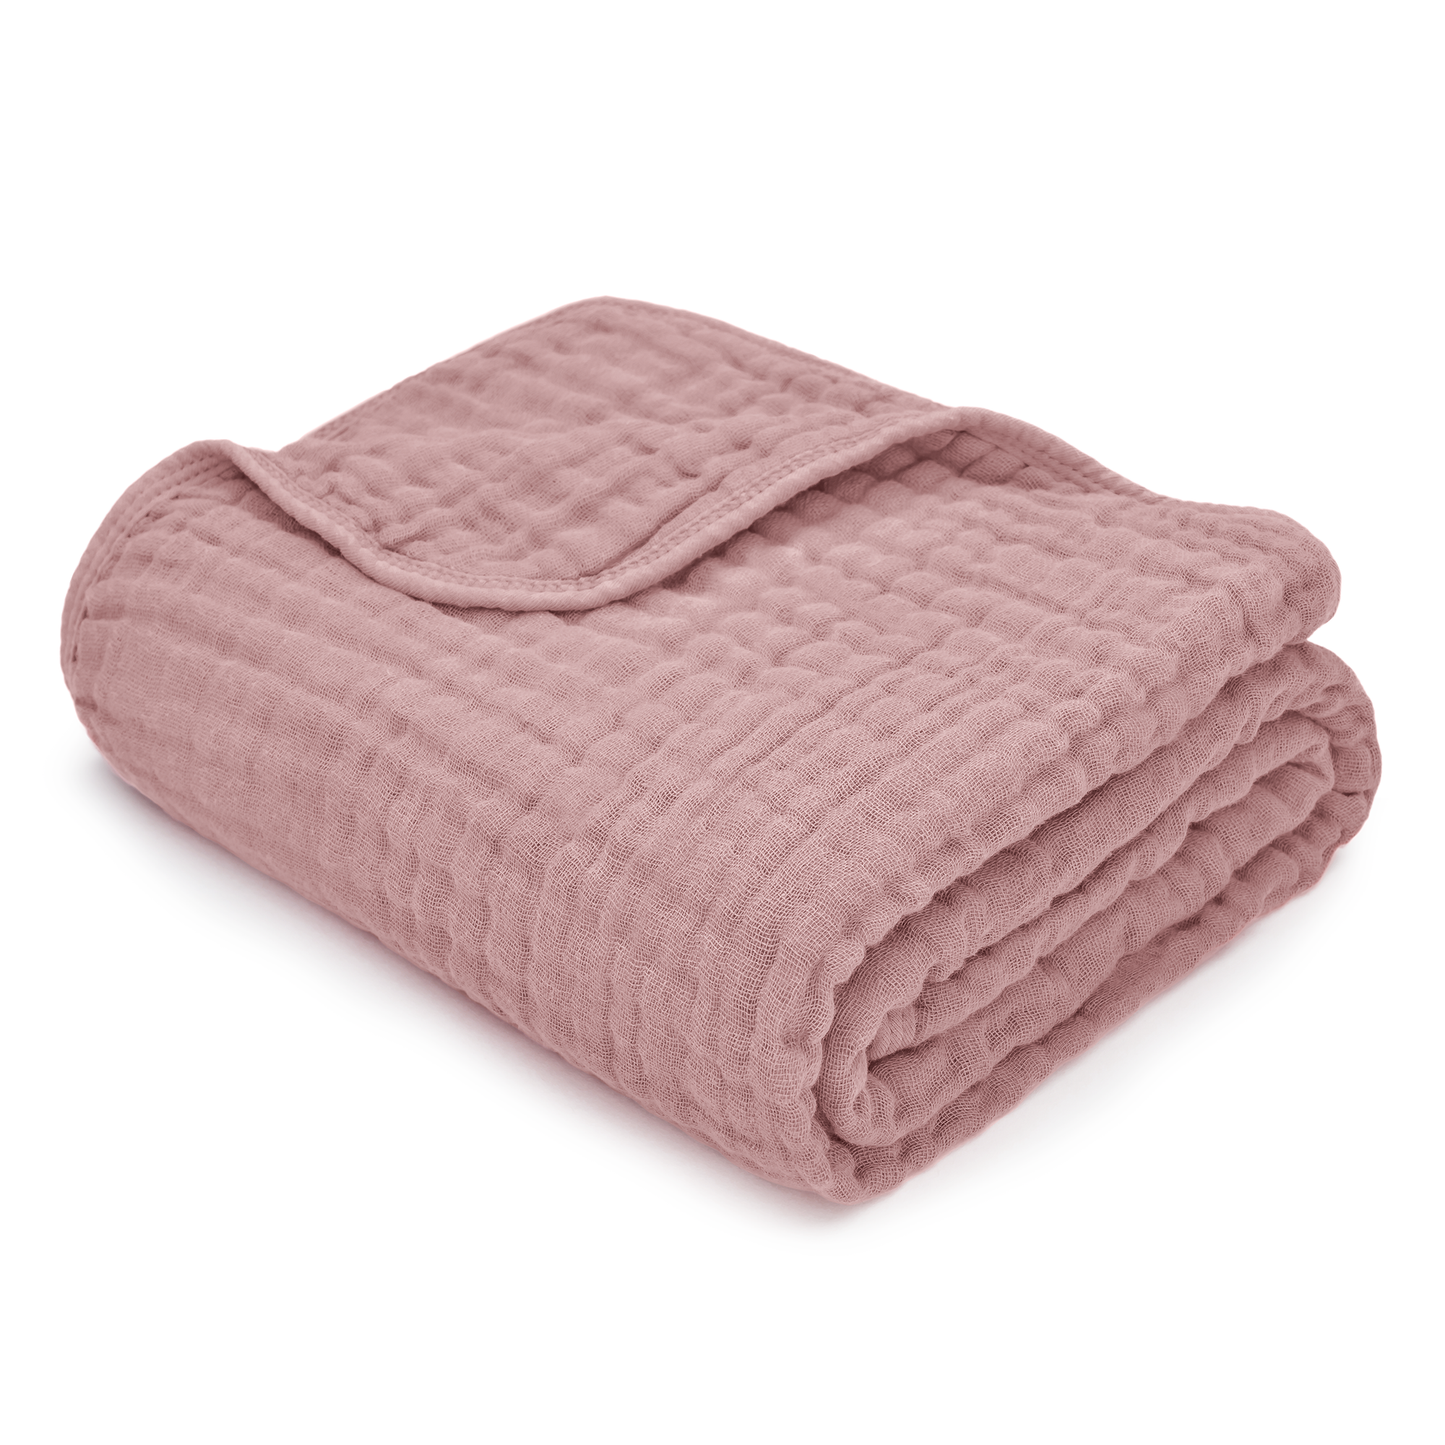 Baby Muslin Cotton Blankets by Comfy Cubs: Mauve